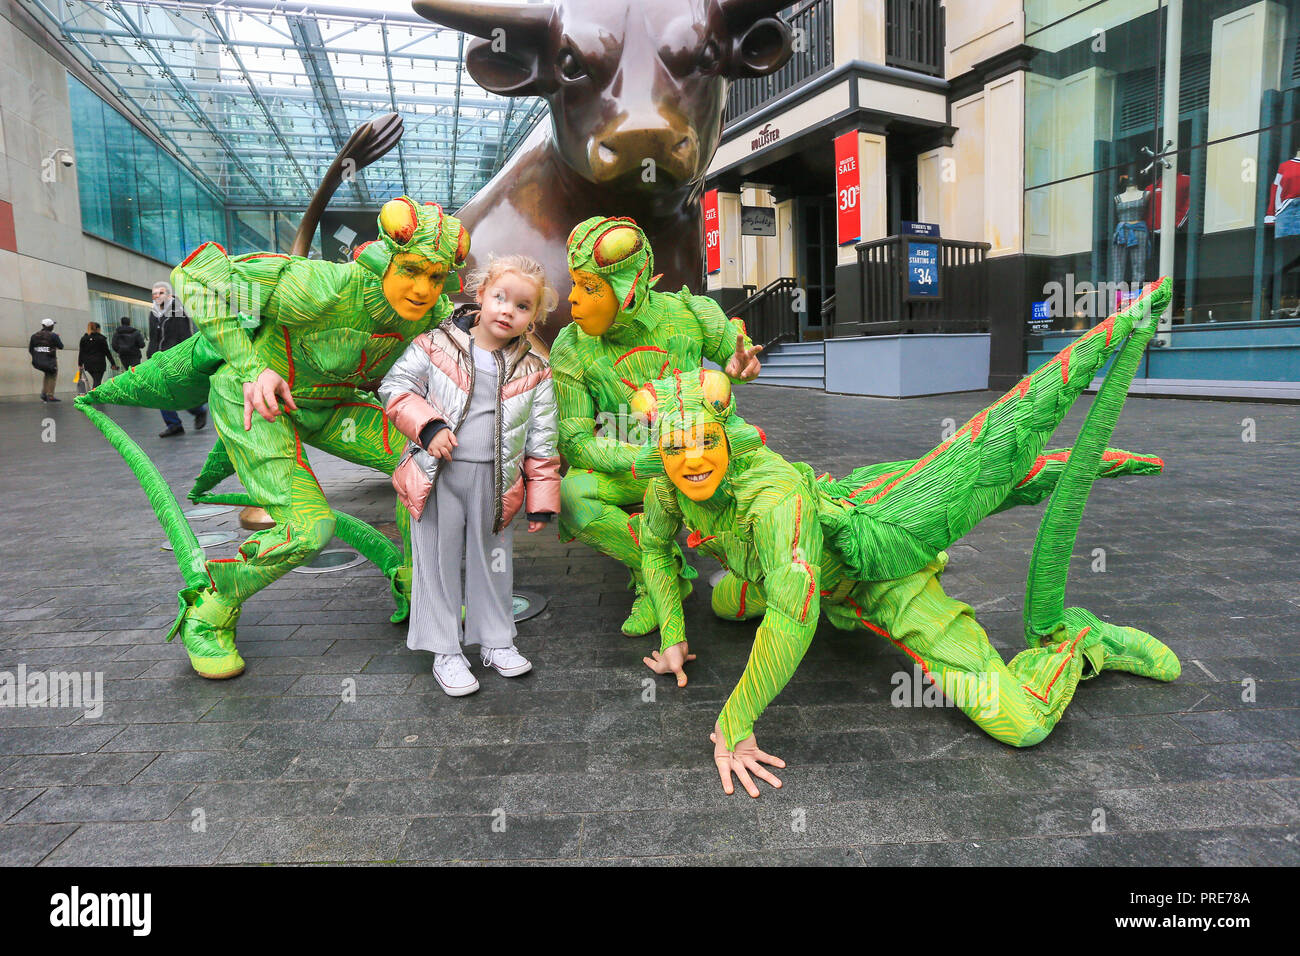 Birmingham, UK. 2nd October, 2018. Three of the cast of crickets in Cirque de Soleil's OVO show arrive in Birmingham Bull Ring ahead of their premiere performance on Wednesday 3rd October in The Arena, Birmingham. 4 year-old Isla from Birmingham is cuaght up in the theatrics. The production of one of the world's most creative and skilful circuses runs from 3rd - 7th October 2018. Peter Lopeman/Alamy Live News Stock Photo